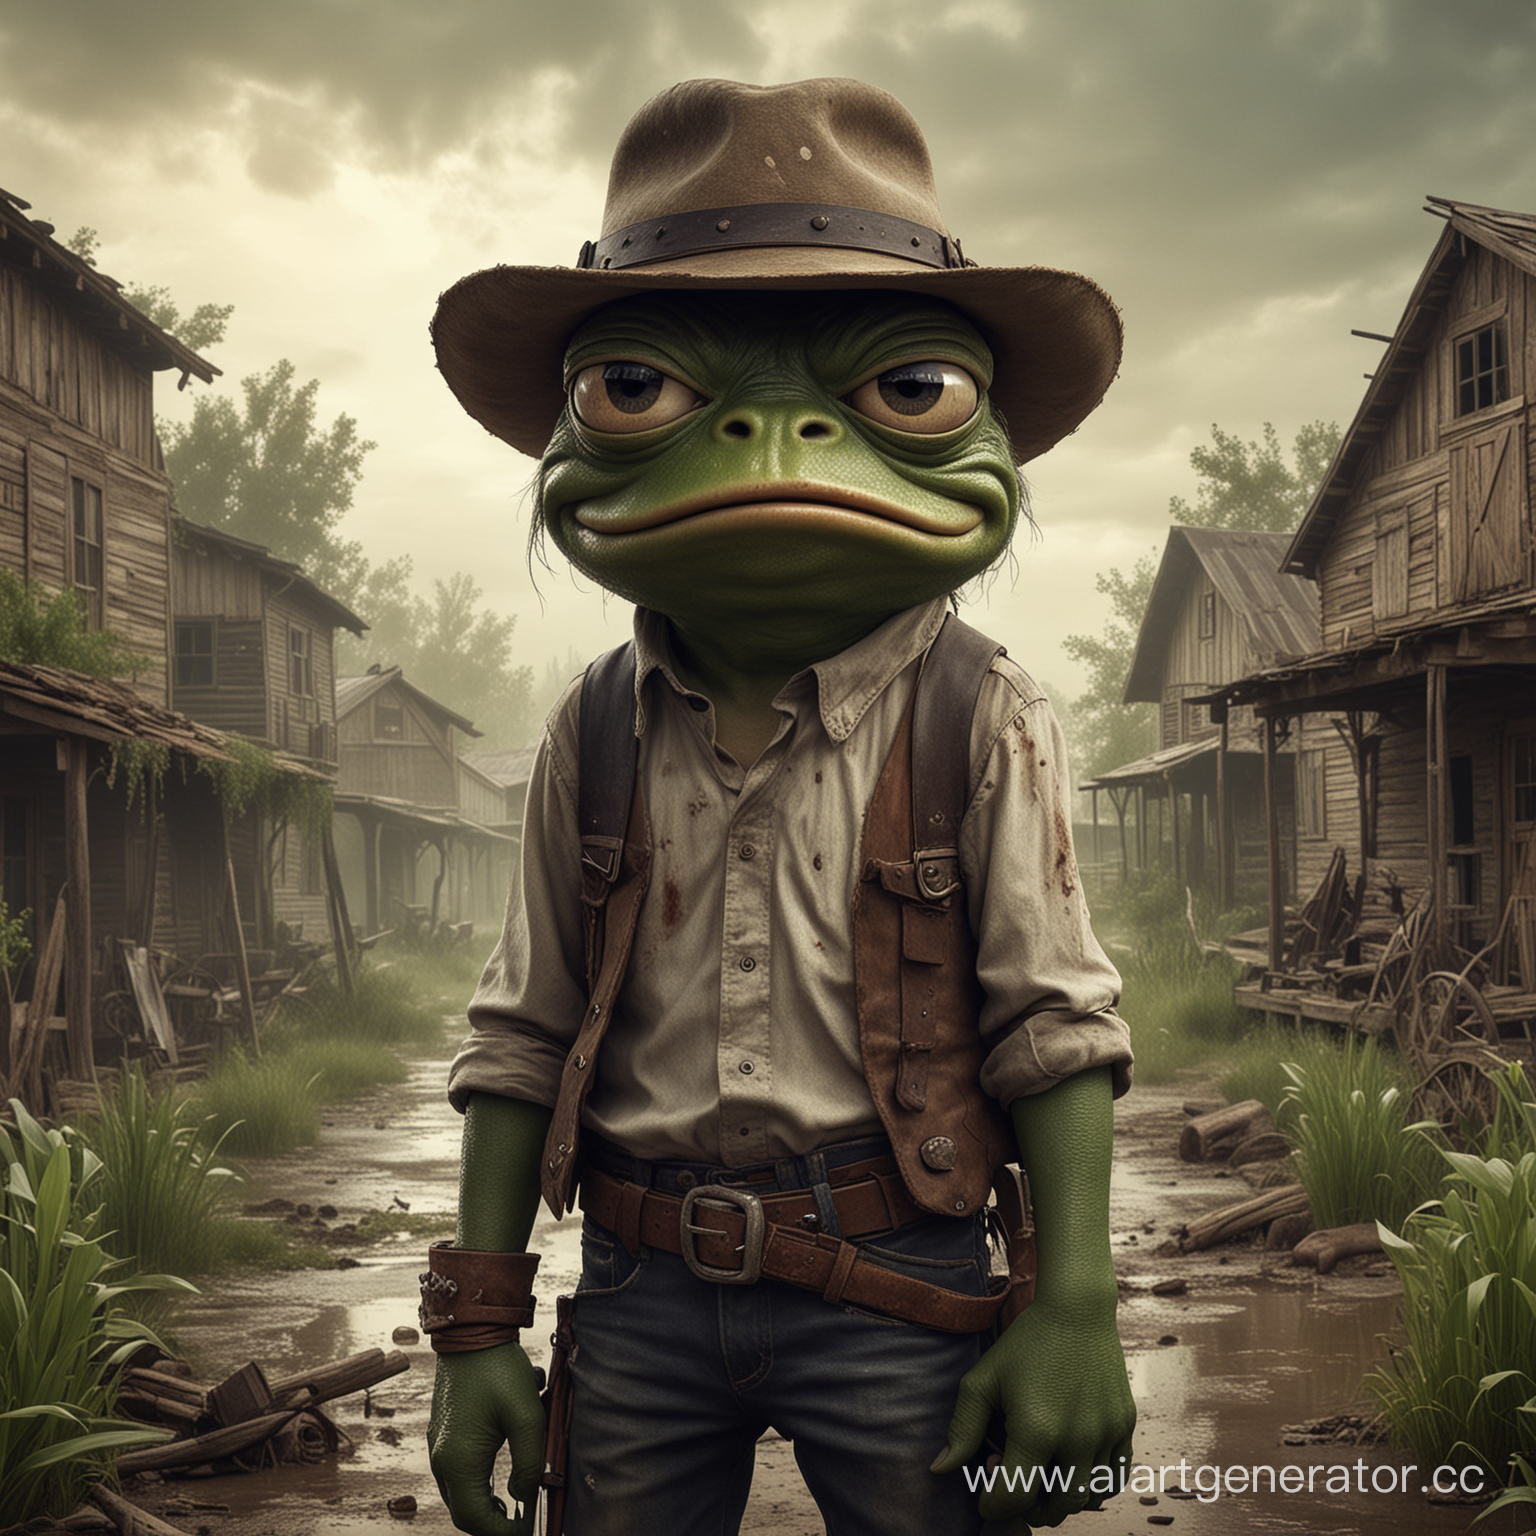 Angry eyes and smile Pepe Frog in Western style apocalypse, zombie and monster, gloomy atmosphere, 1865 years, Wild West, Winfield in the hands, he stands like a tough guy in full height, swamps with extensive greenery and old buildings and barns, old filter